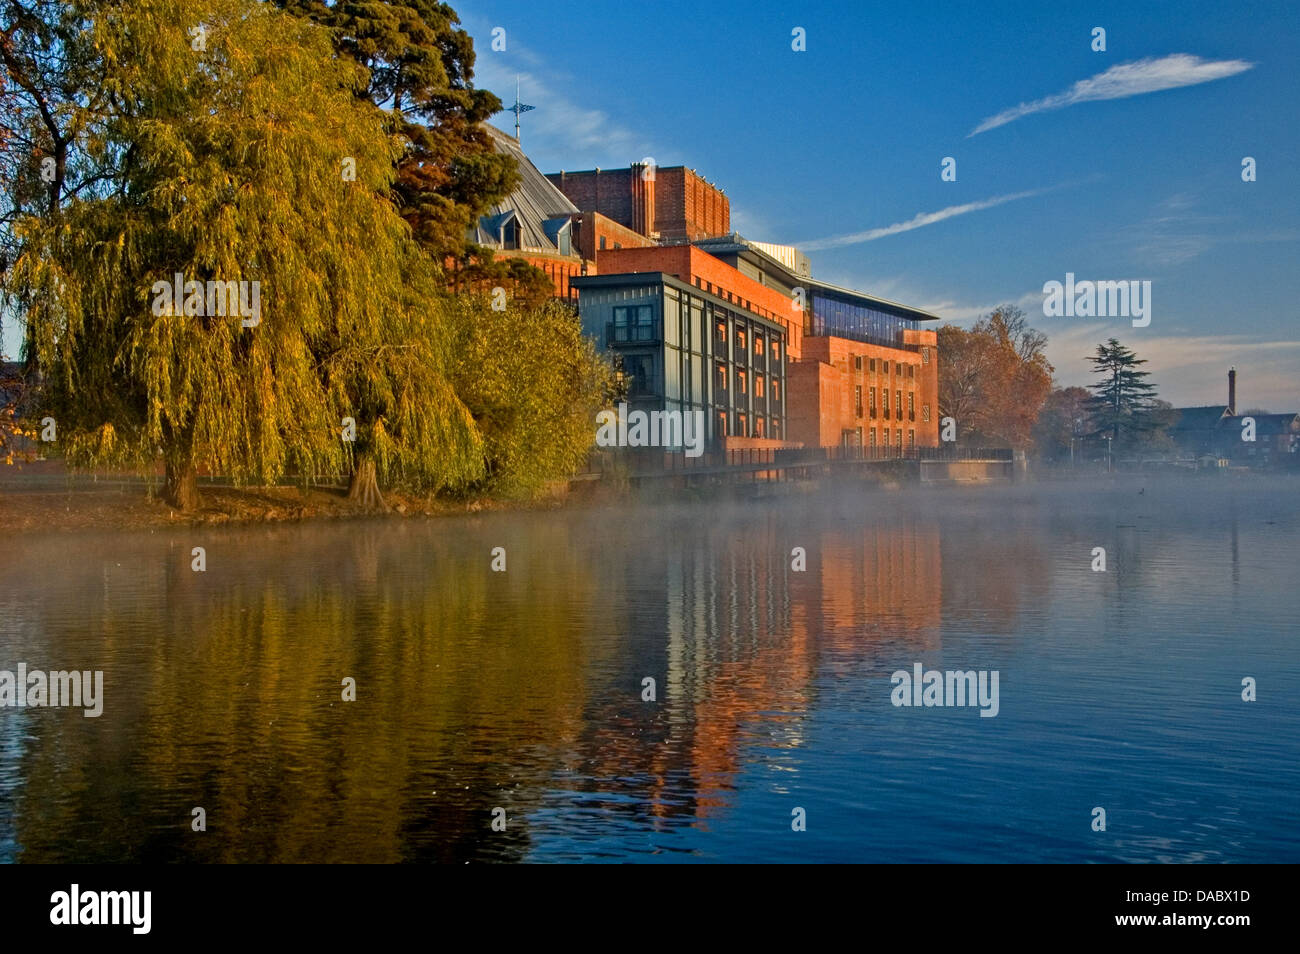 Stratford upon Avon, Royal Shakespeare Theatre on the banks of the River Avon on a misty autumnal morning. Stock Photo